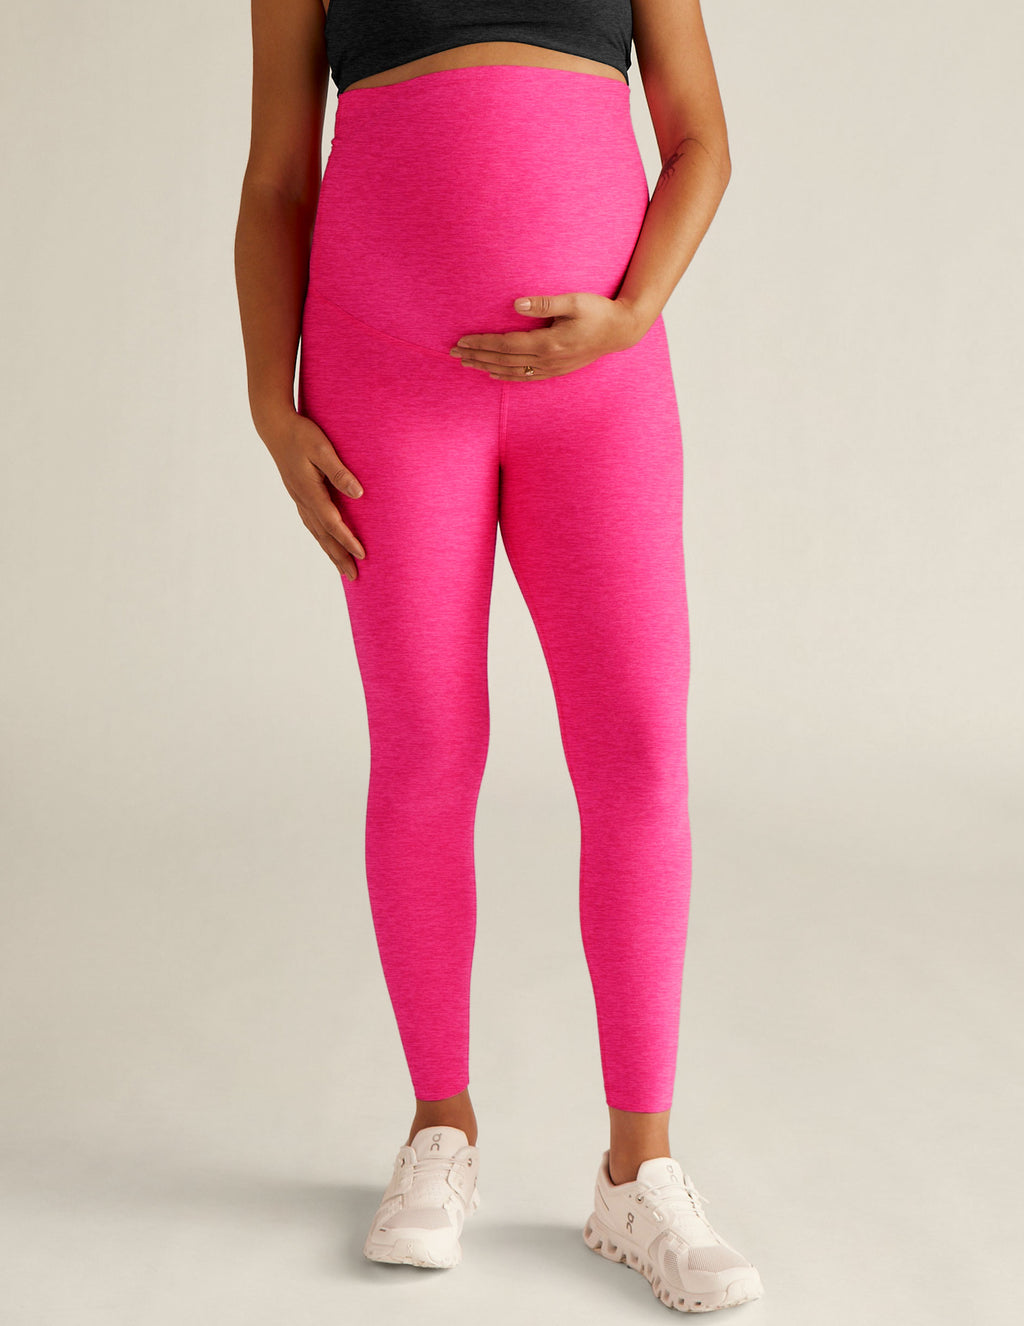 SALE & OFFERS - MELANIA - Super Comfortable Maternity Leggings in Warm  Ponte di Roma with High Band